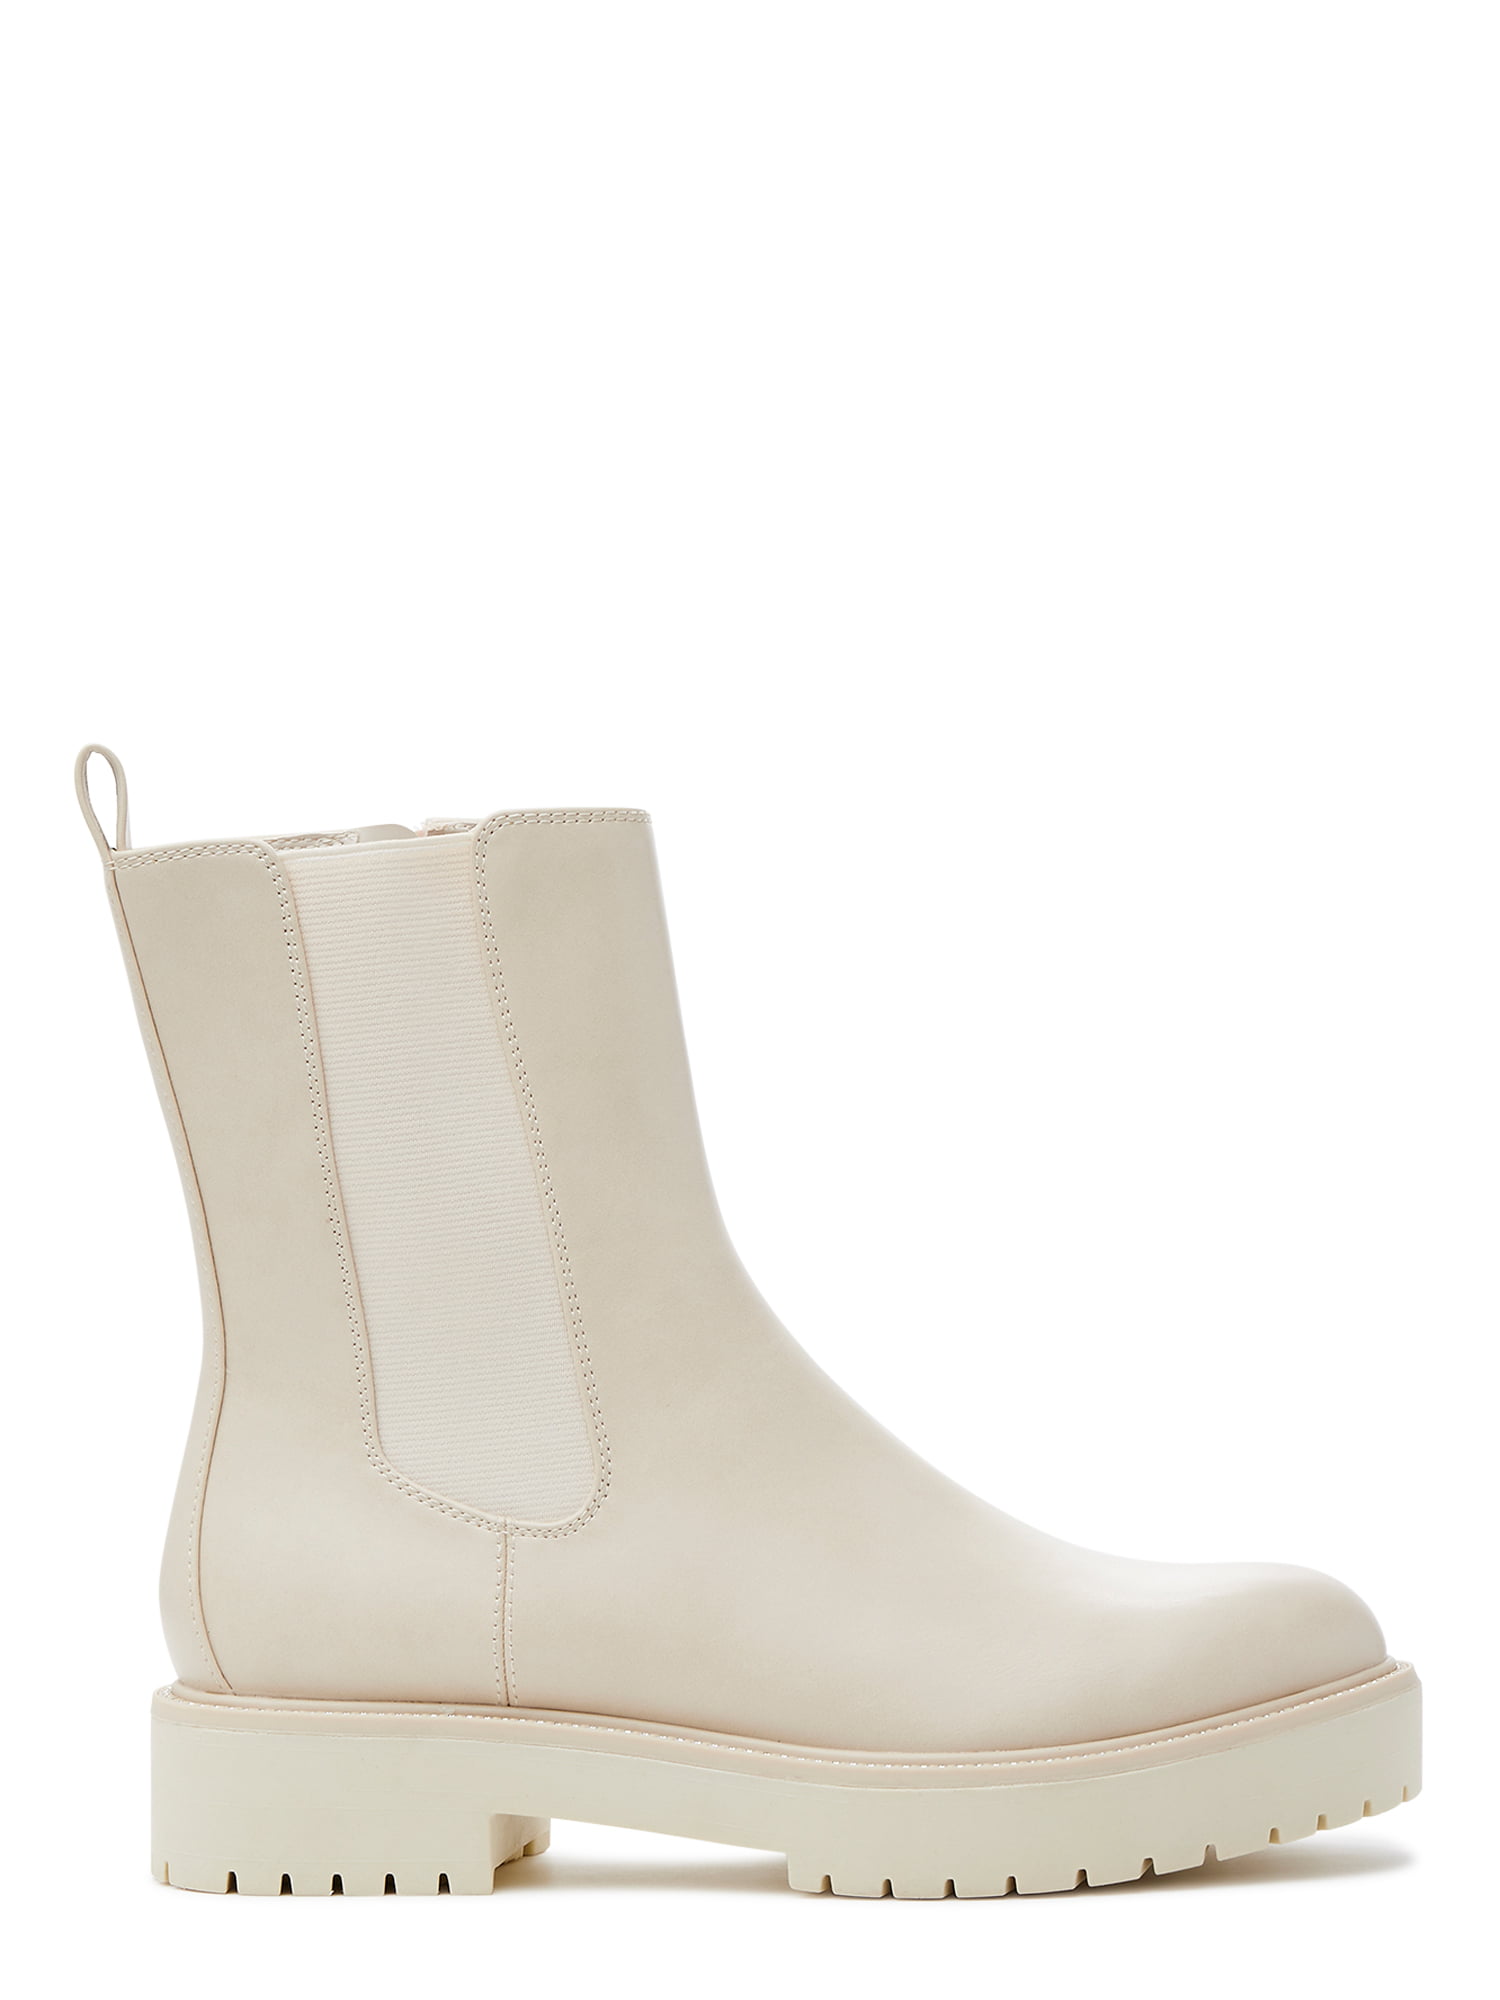 30 Best White Boots to Buy This Season | Who What Wear